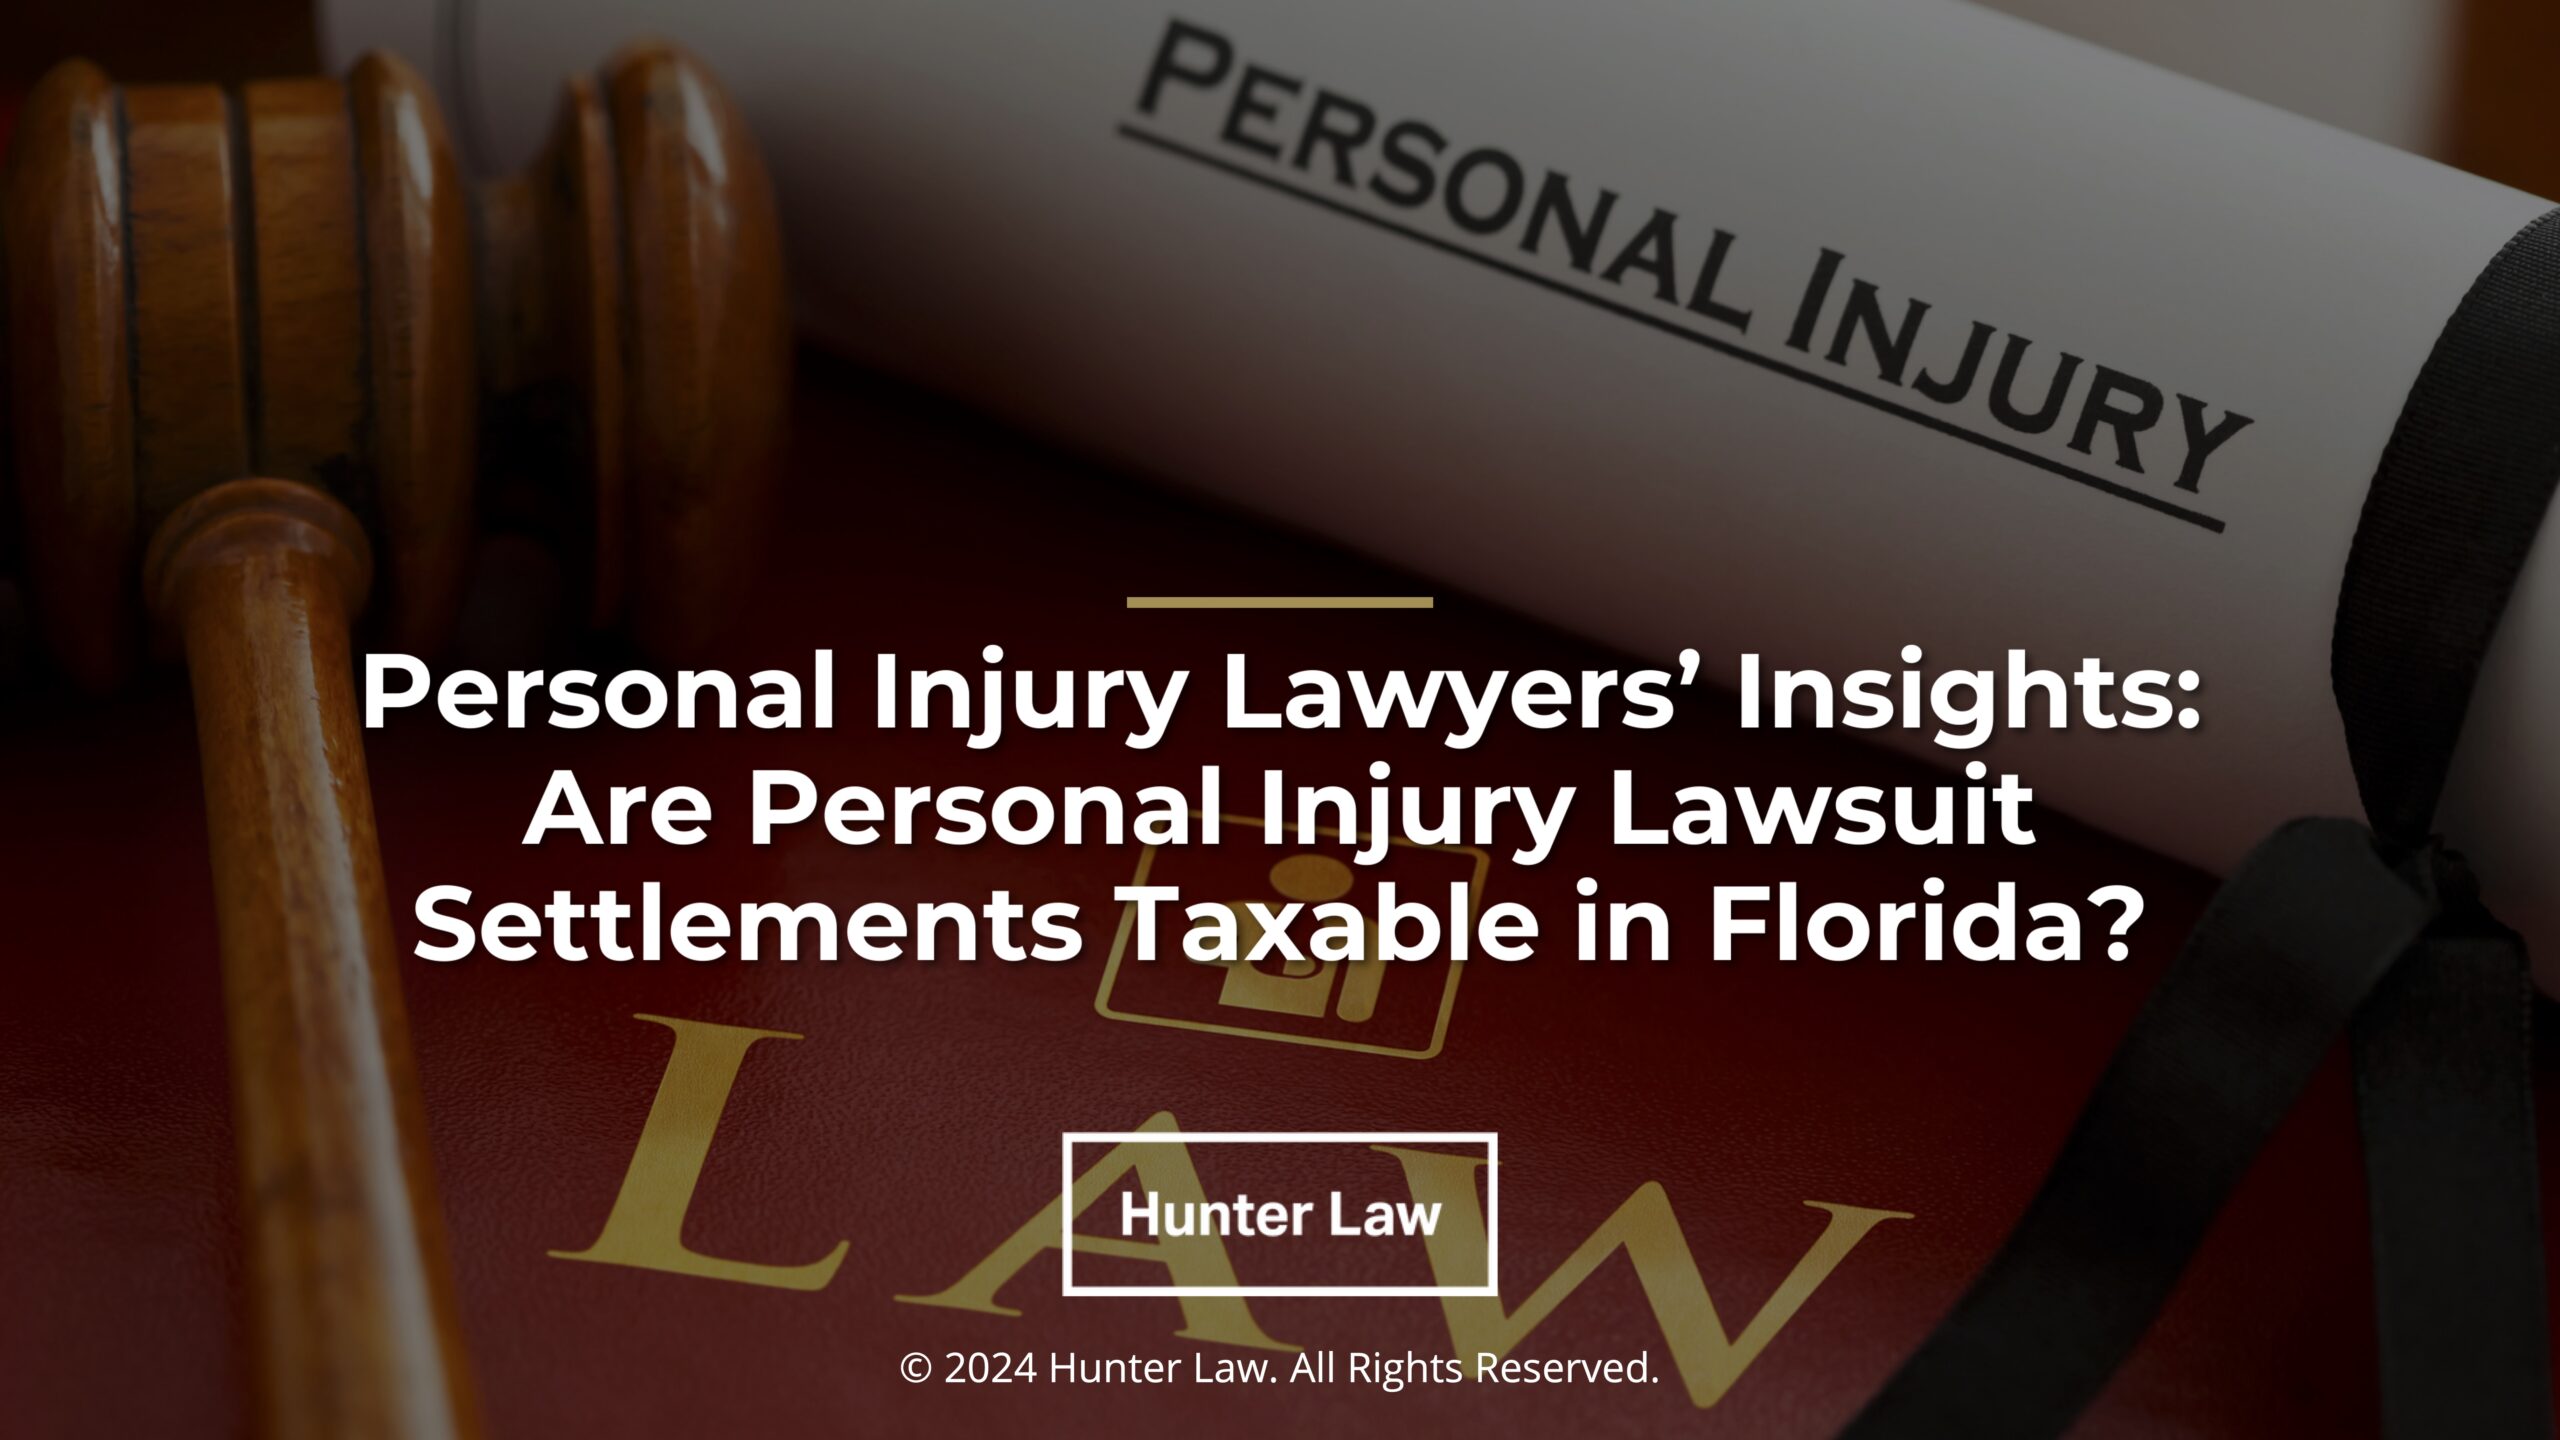 Featured: Red leather law book, judges gavel, personal injury writ- Personal injury lawyers' insights: are personal injury lawsuit settlements taxable in Florida?